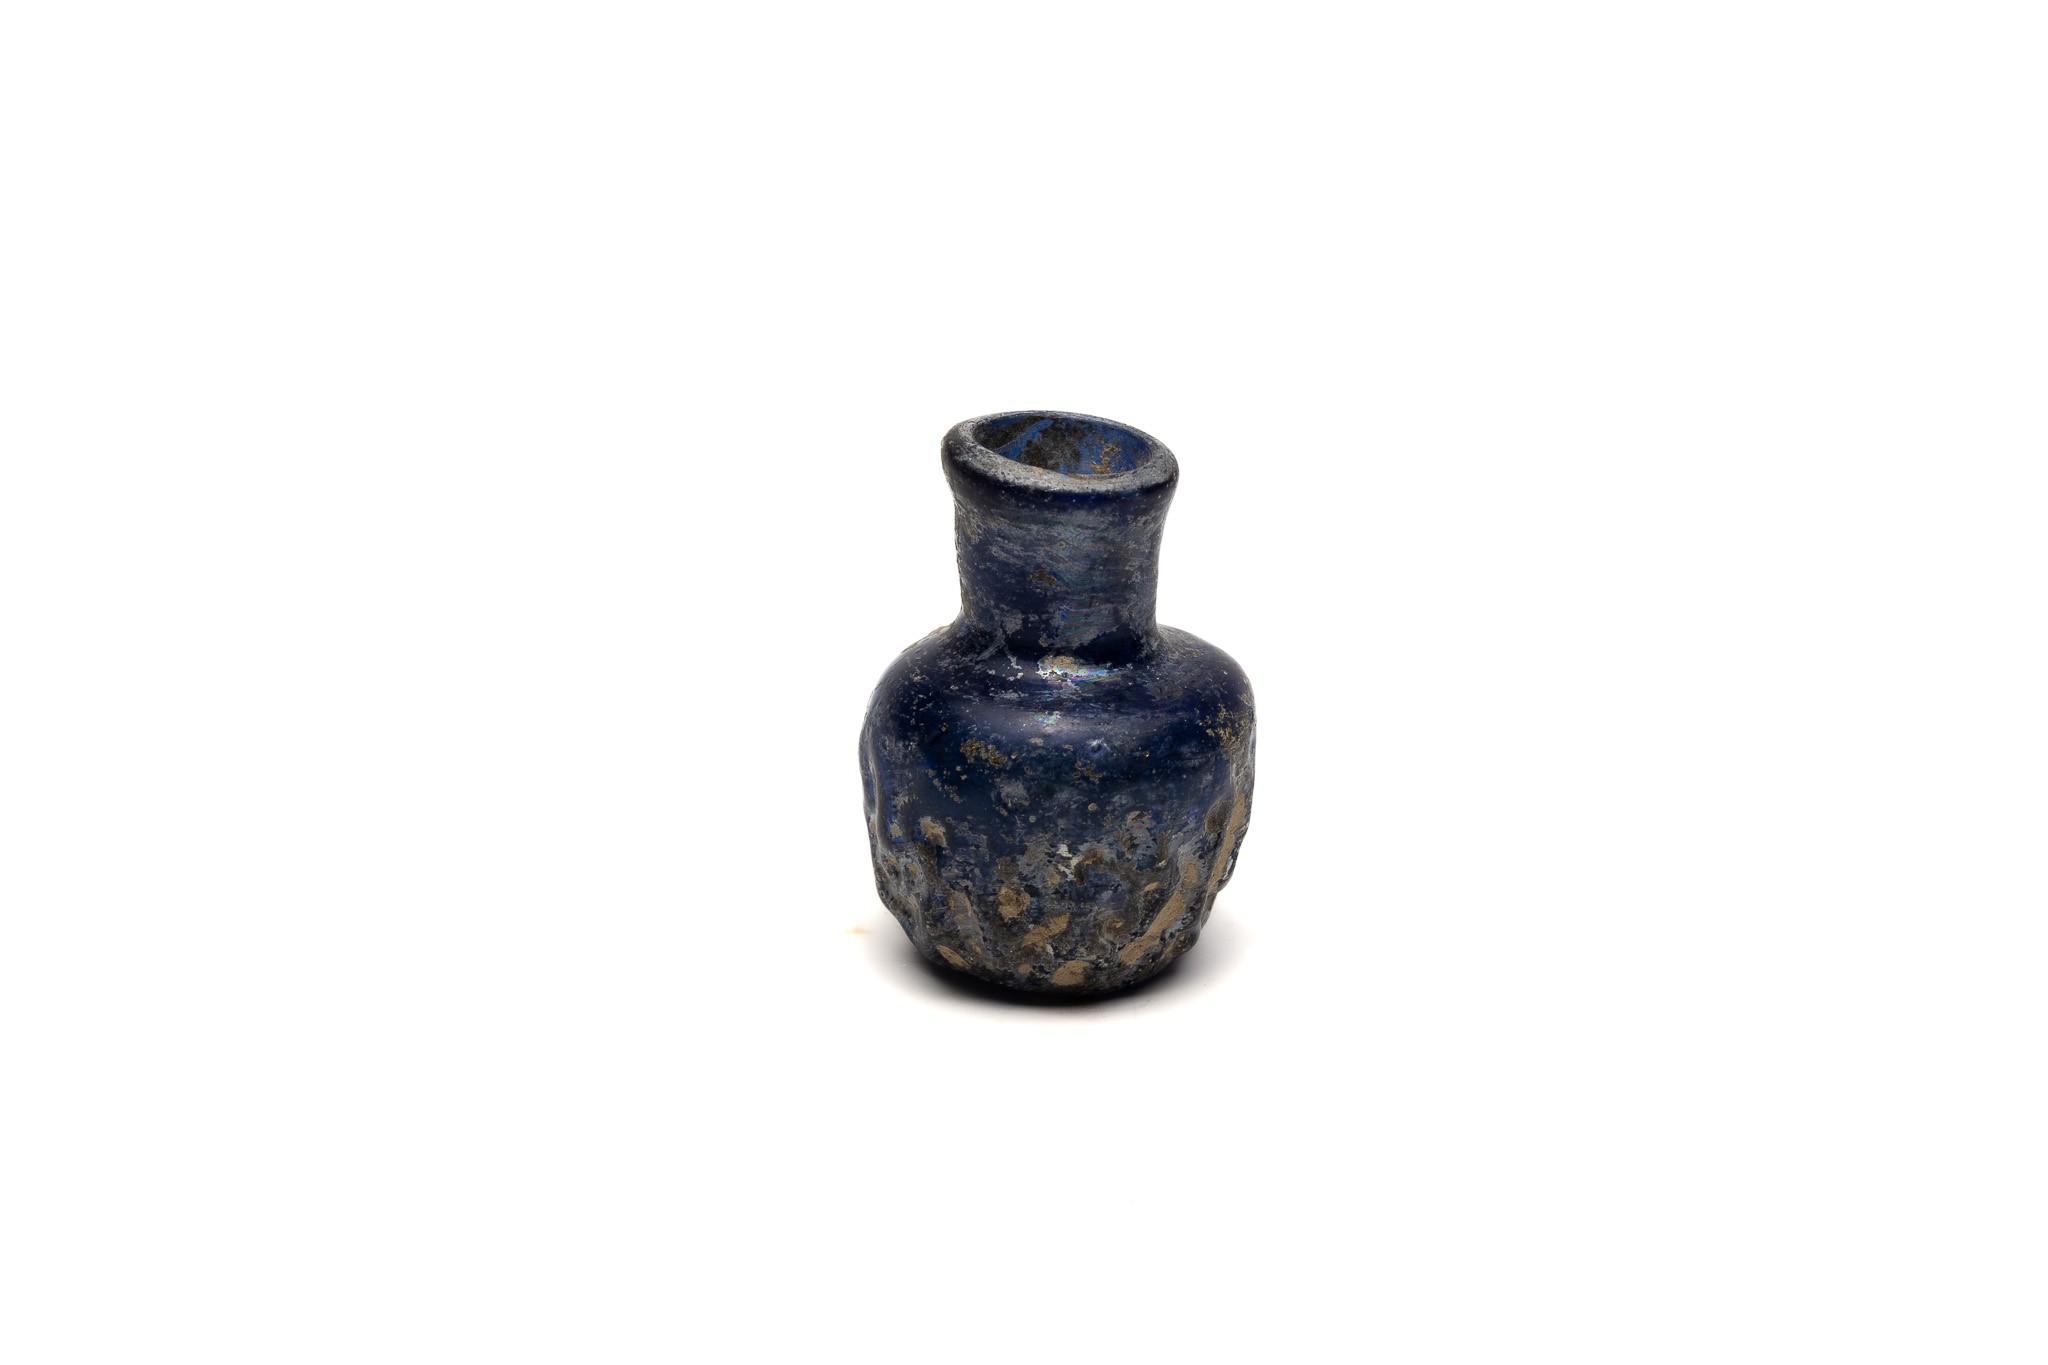 An Islamic Small Blue Moulded Glass with Patina from the 11-12th Century.

H: Approximately 5cm 